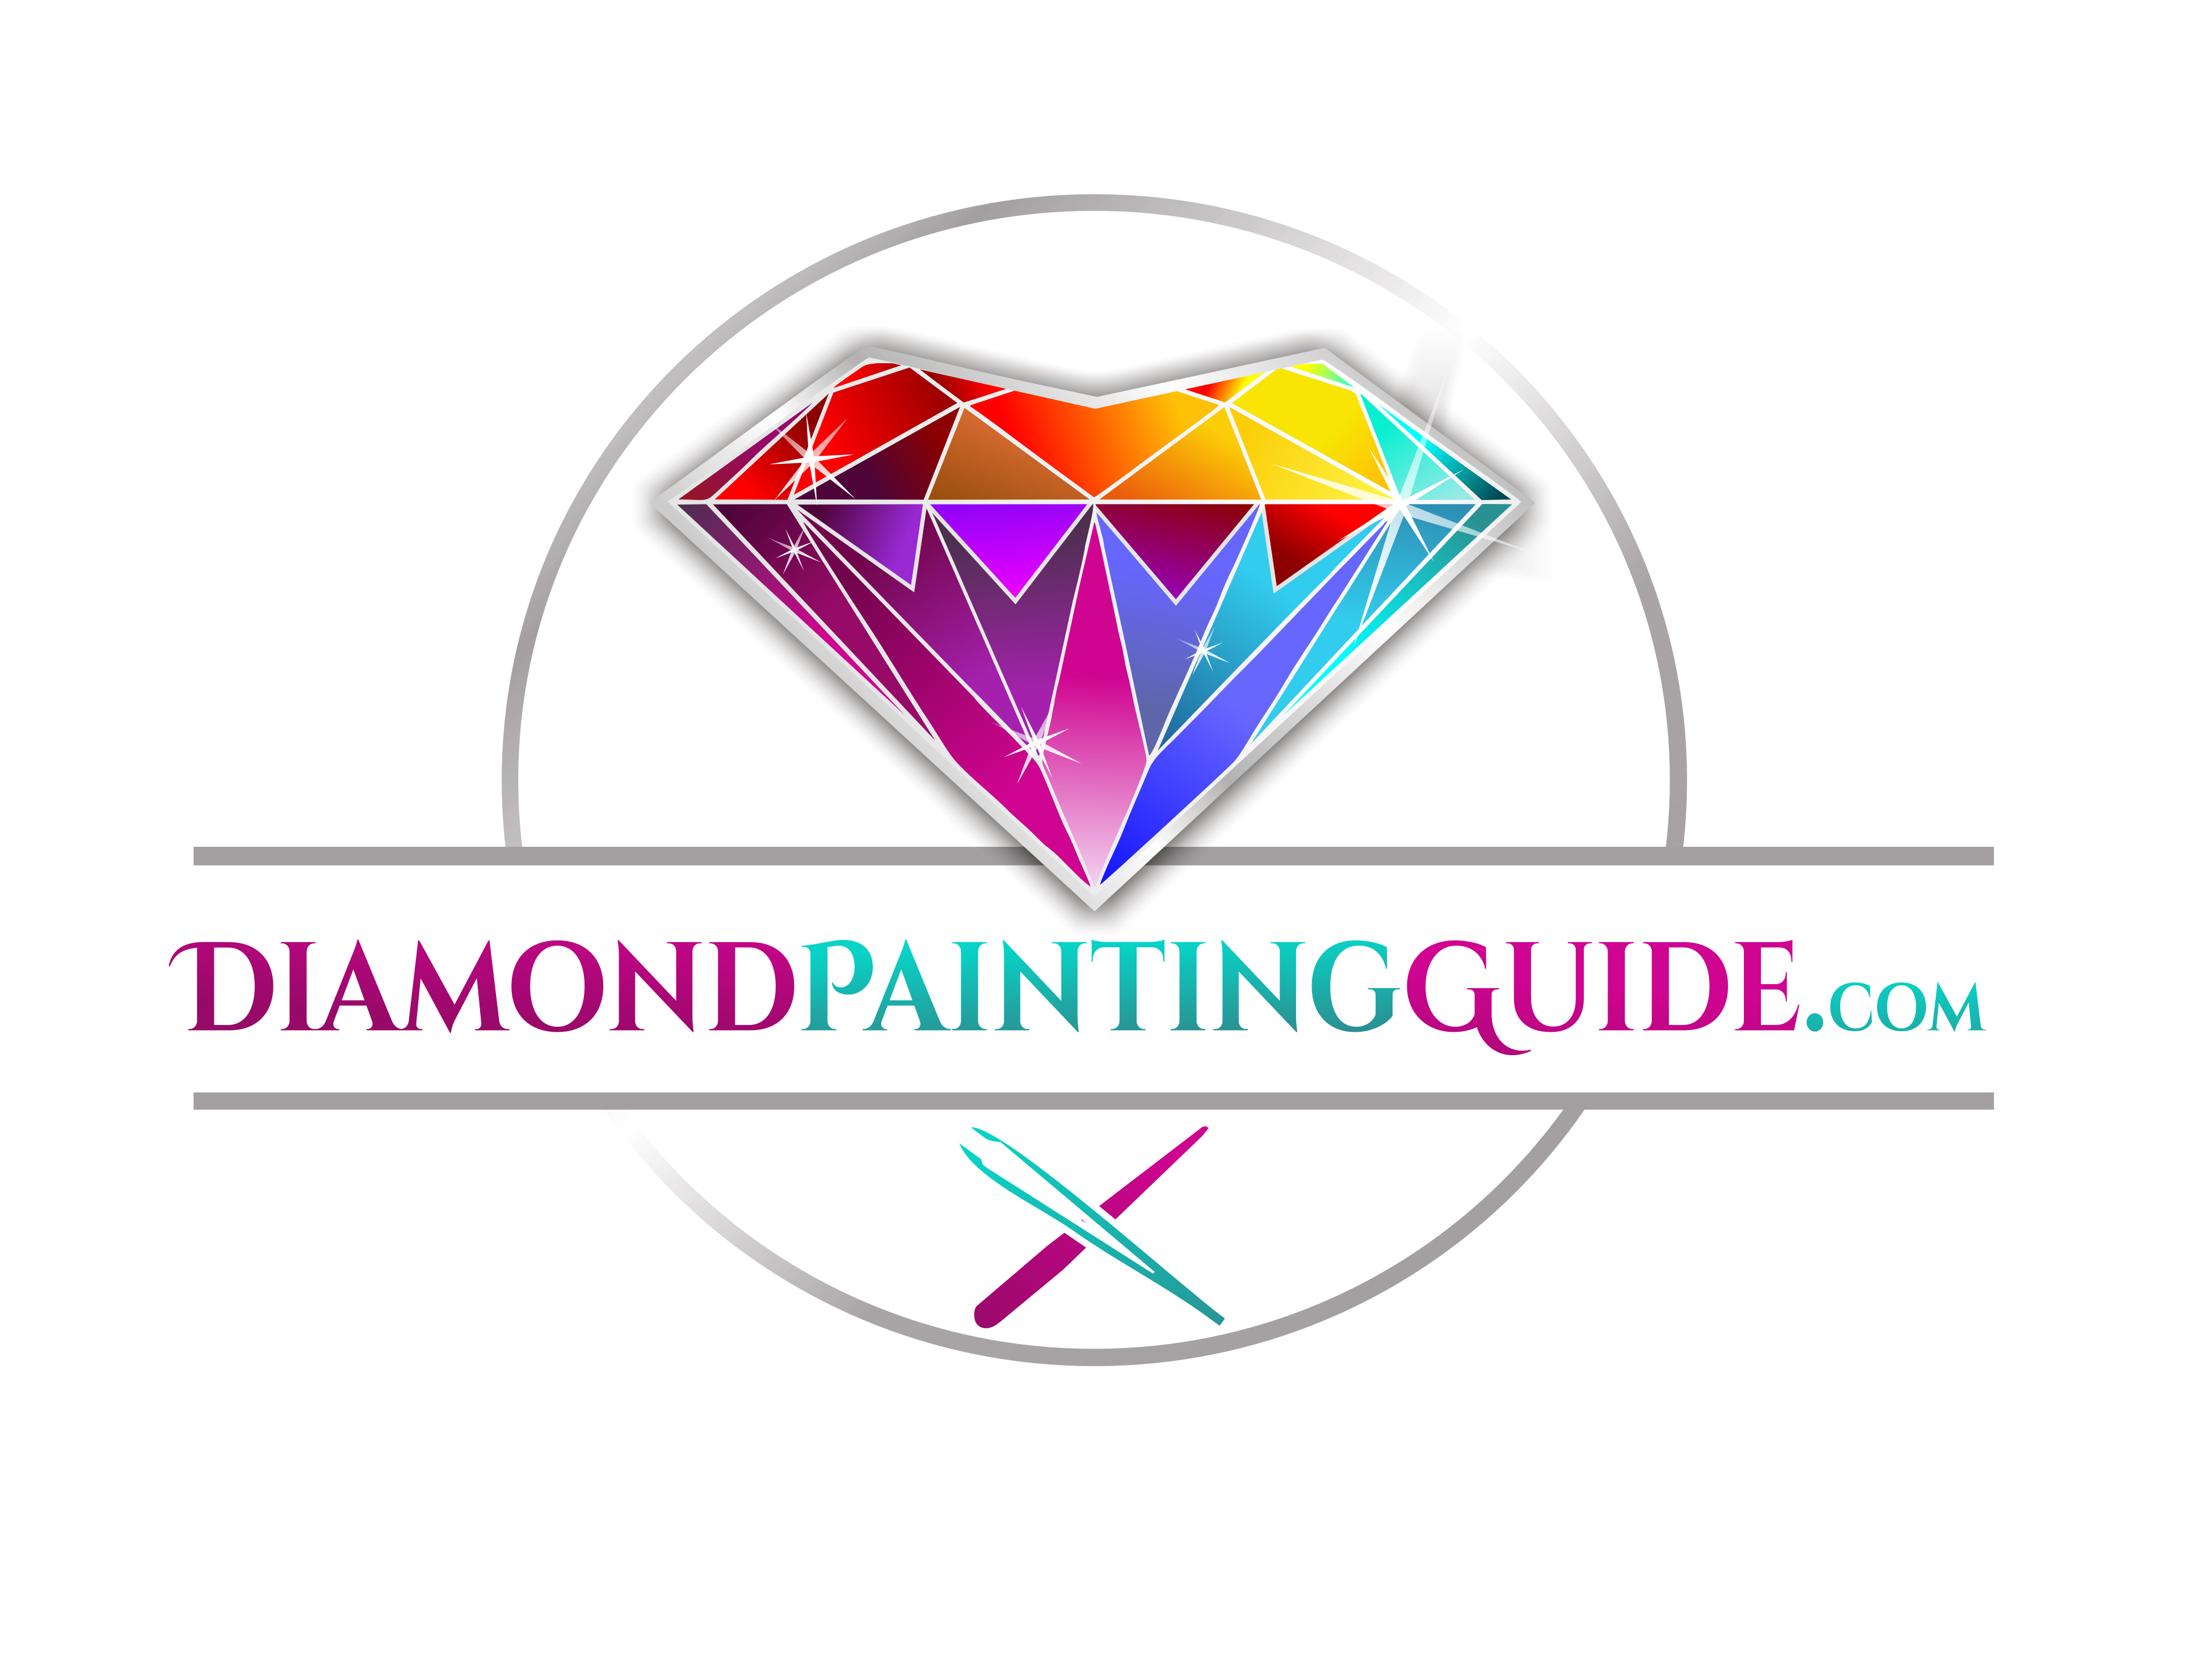 How to Frame a Diamond Painting - Part II (Foam Board Edition) 